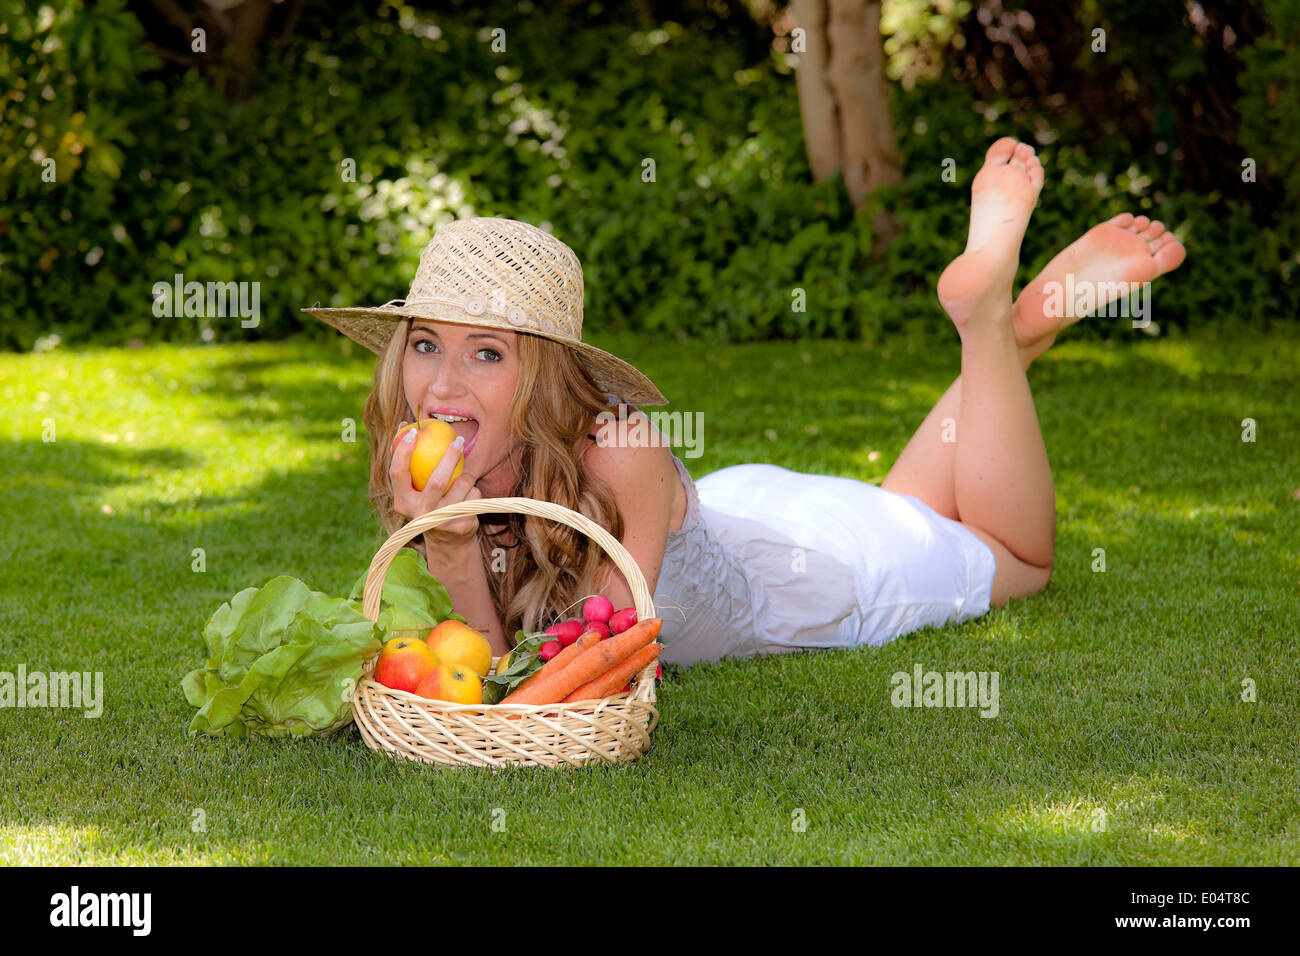 Fruit and vegetables in the basket with woman, Obst und Gemuese im Korb mit Frau Stock Photo